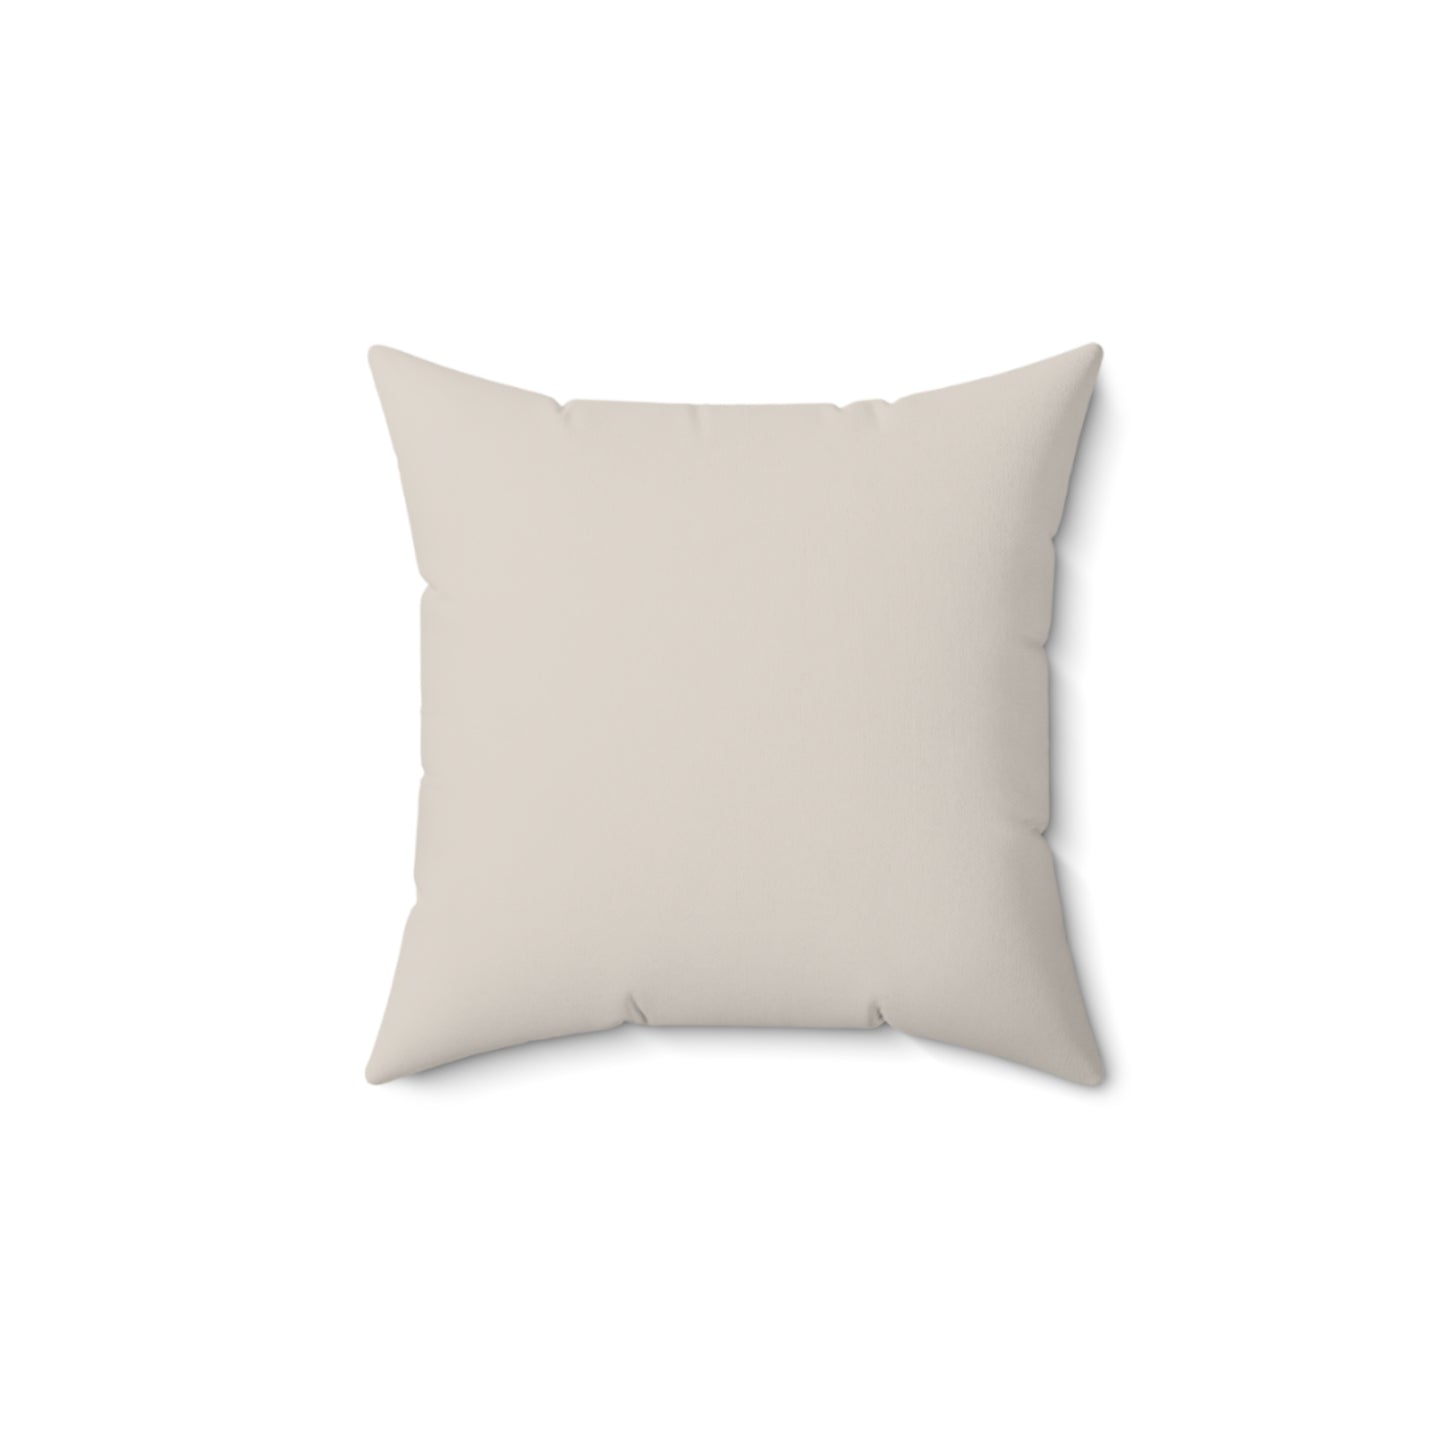 Trash Cans Square Pillow